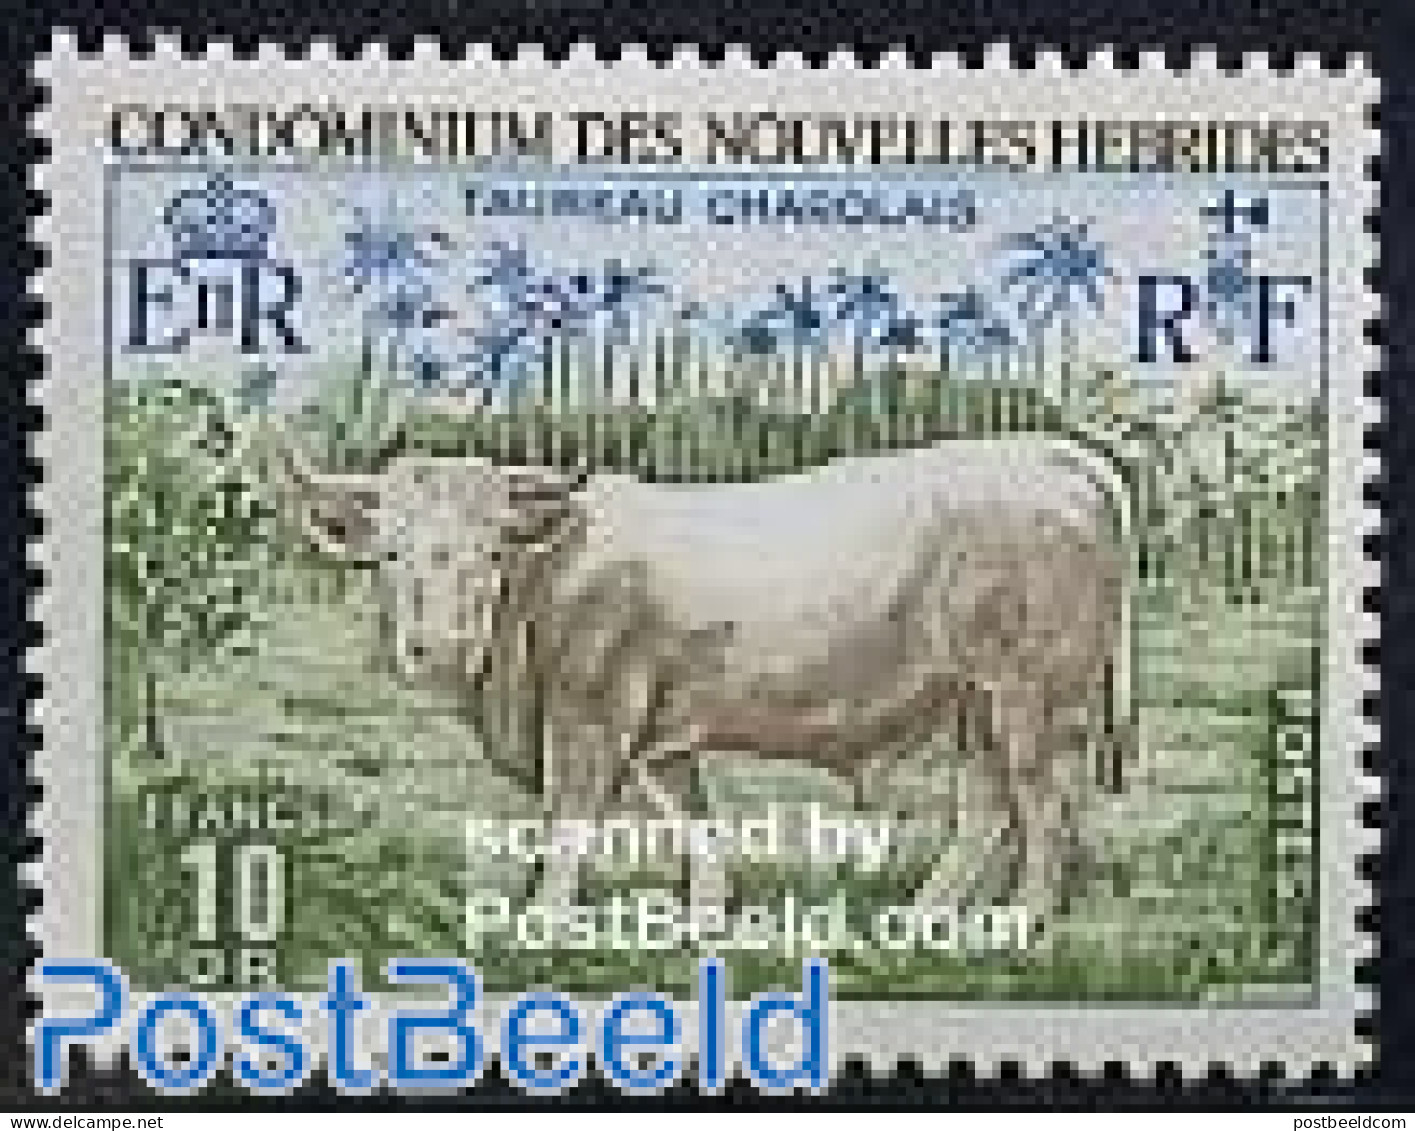 New Hebrides 1975 Definitive 1v F, Mint NH, Nature - Animals (others & Mixed) - Cattle - Ongebruikt